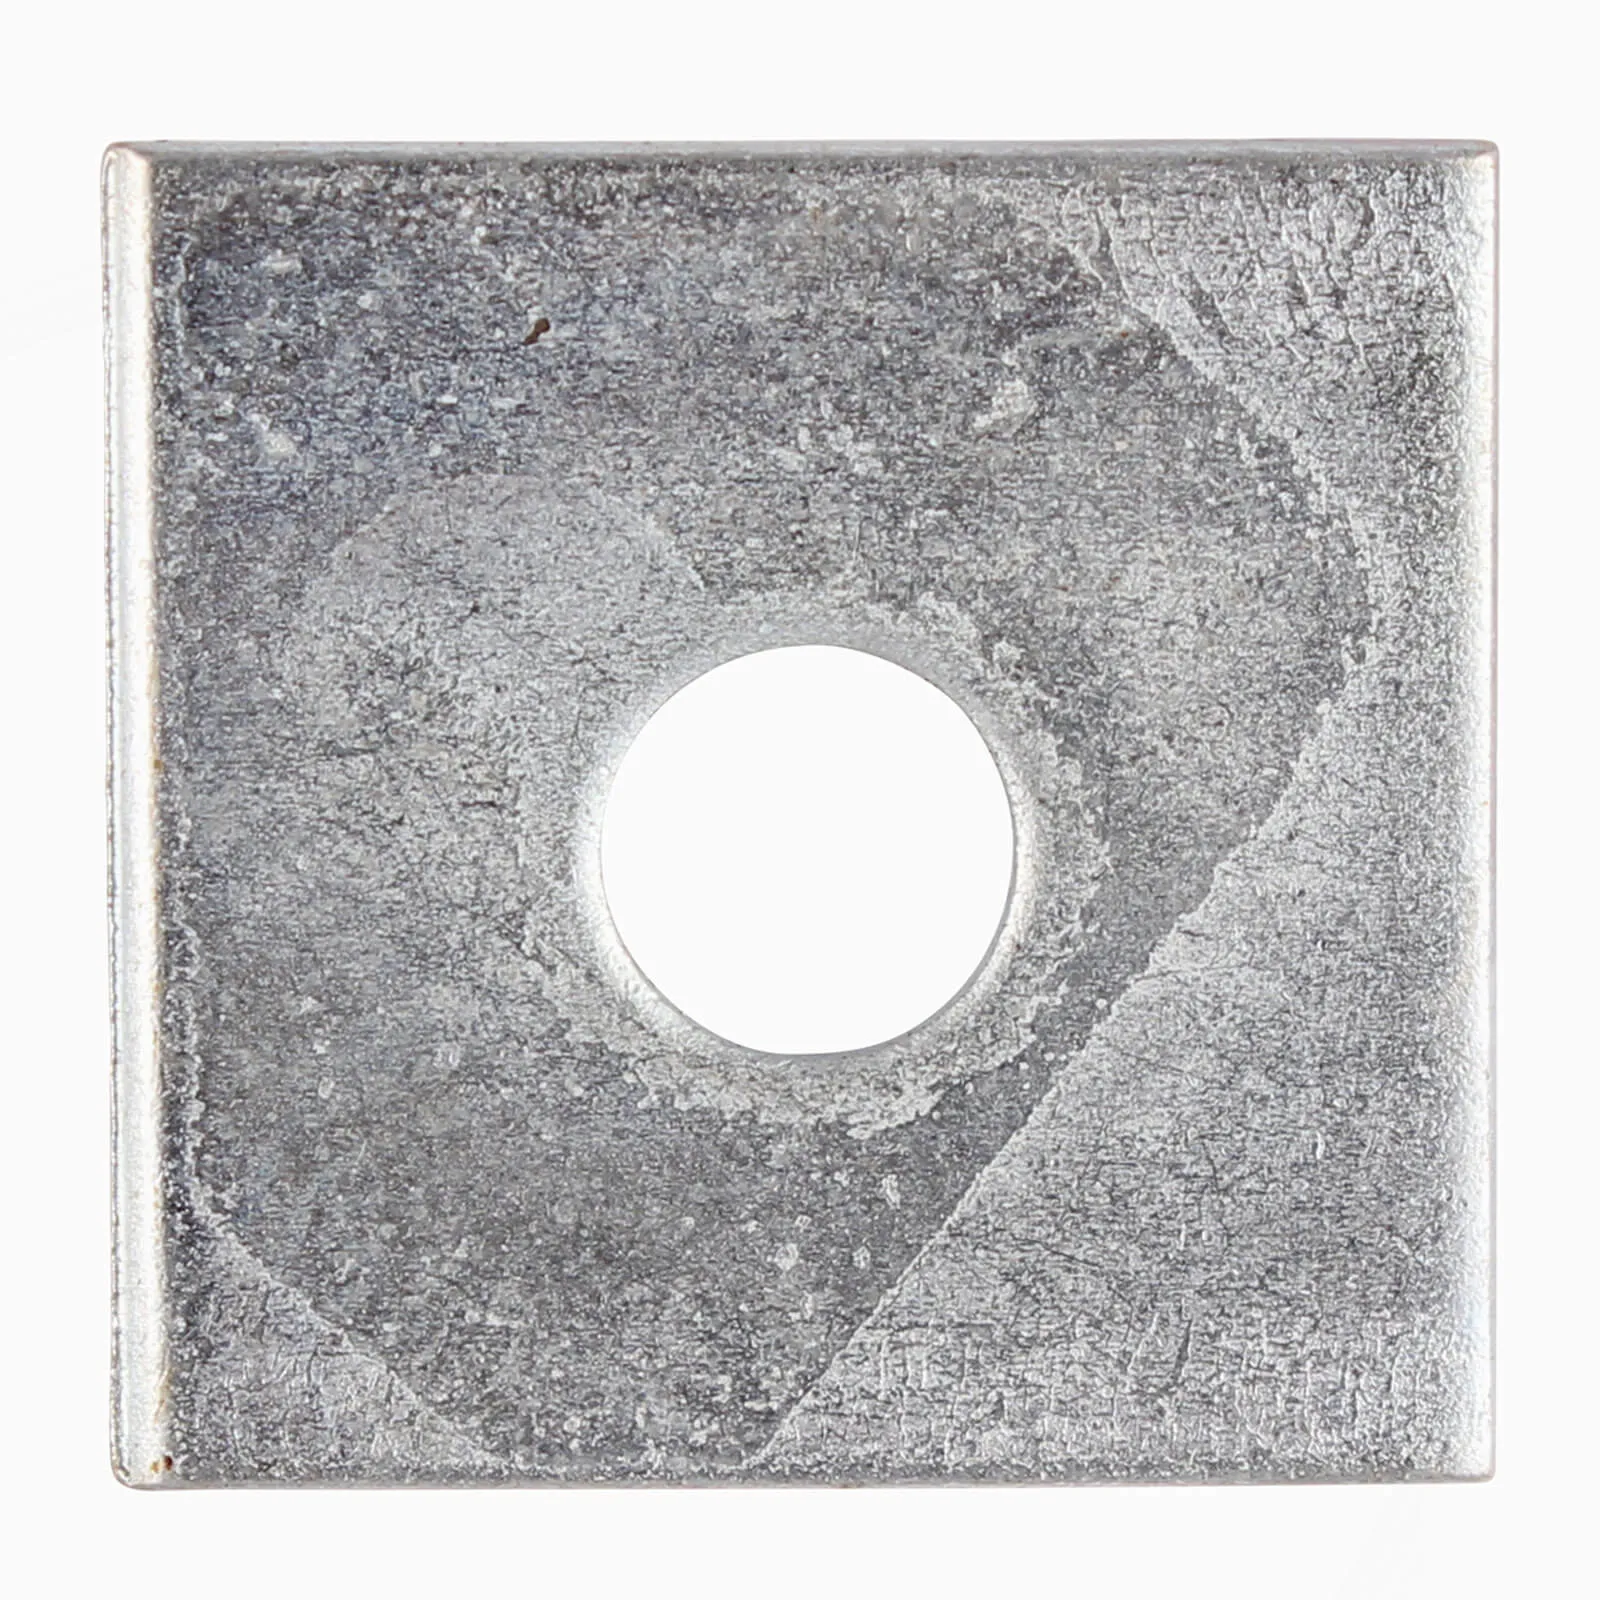 Square Plate Washer Zinc Plated - 10mm, 50mm, Pack of 30